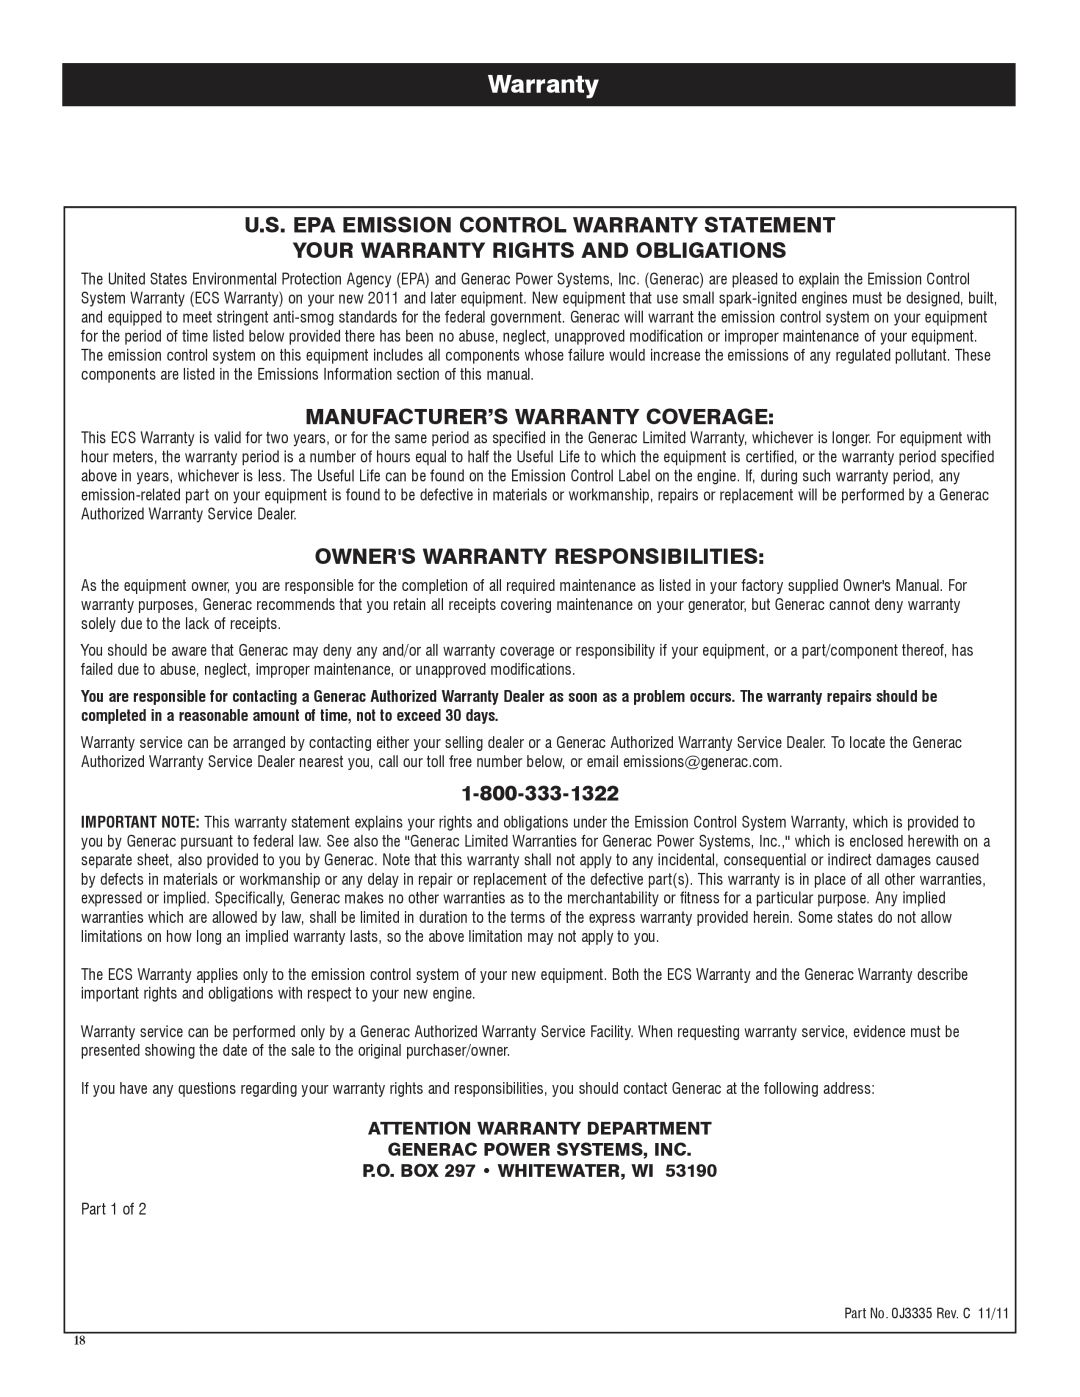 Honeywell 6039 owner manual U.S. Epa Emission Control Warranty Statement, Your Warranty Rights And Obligations 